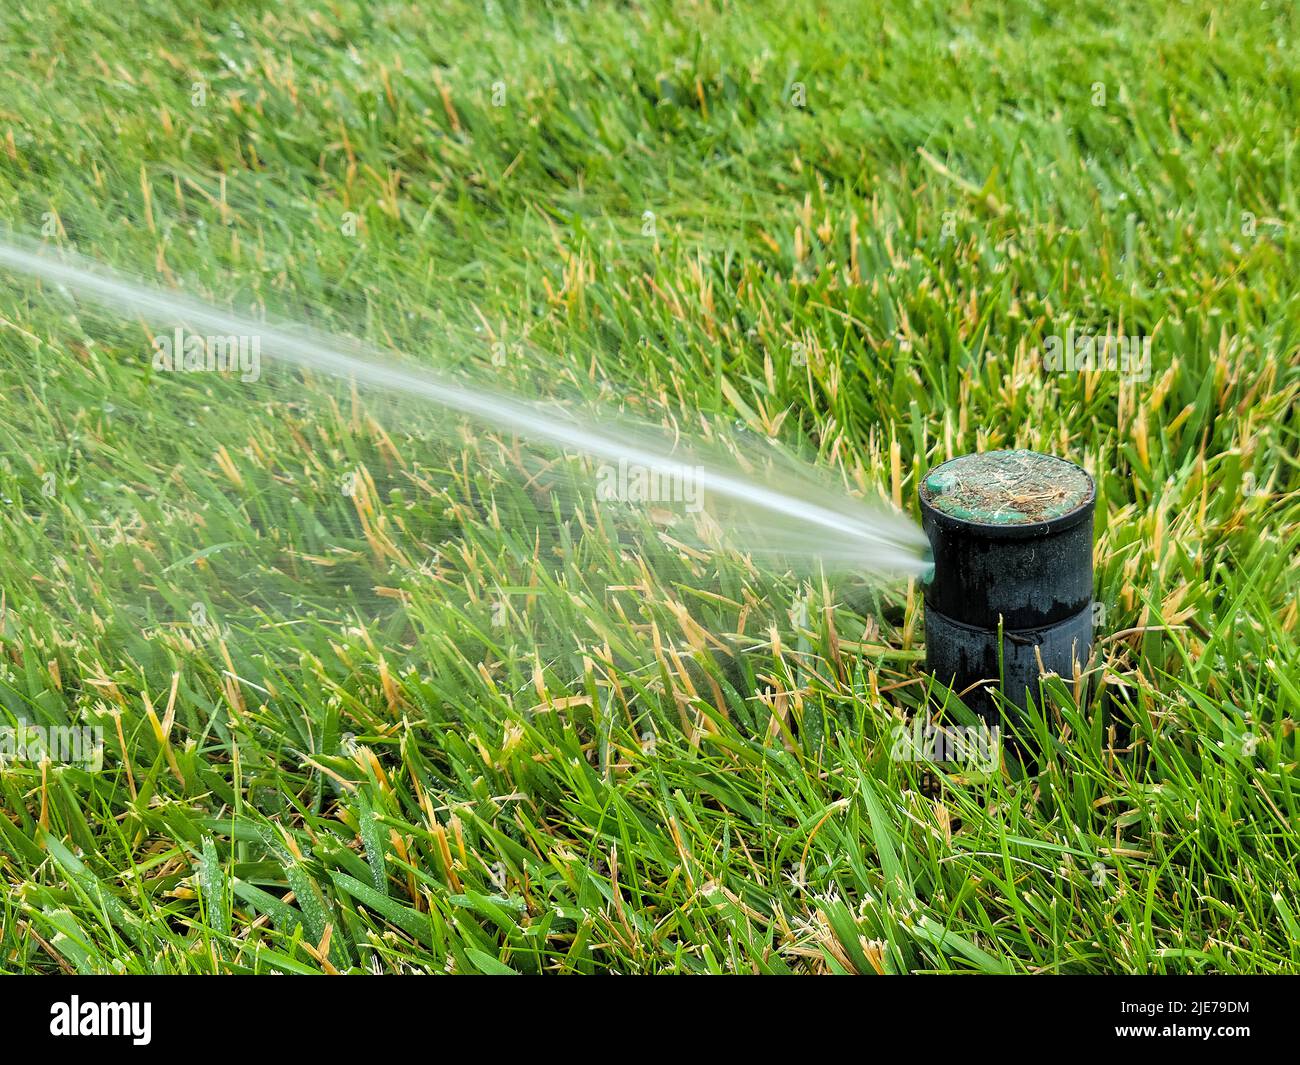 Close up of underground sprinkler head in green grass with water spray Stock Photo